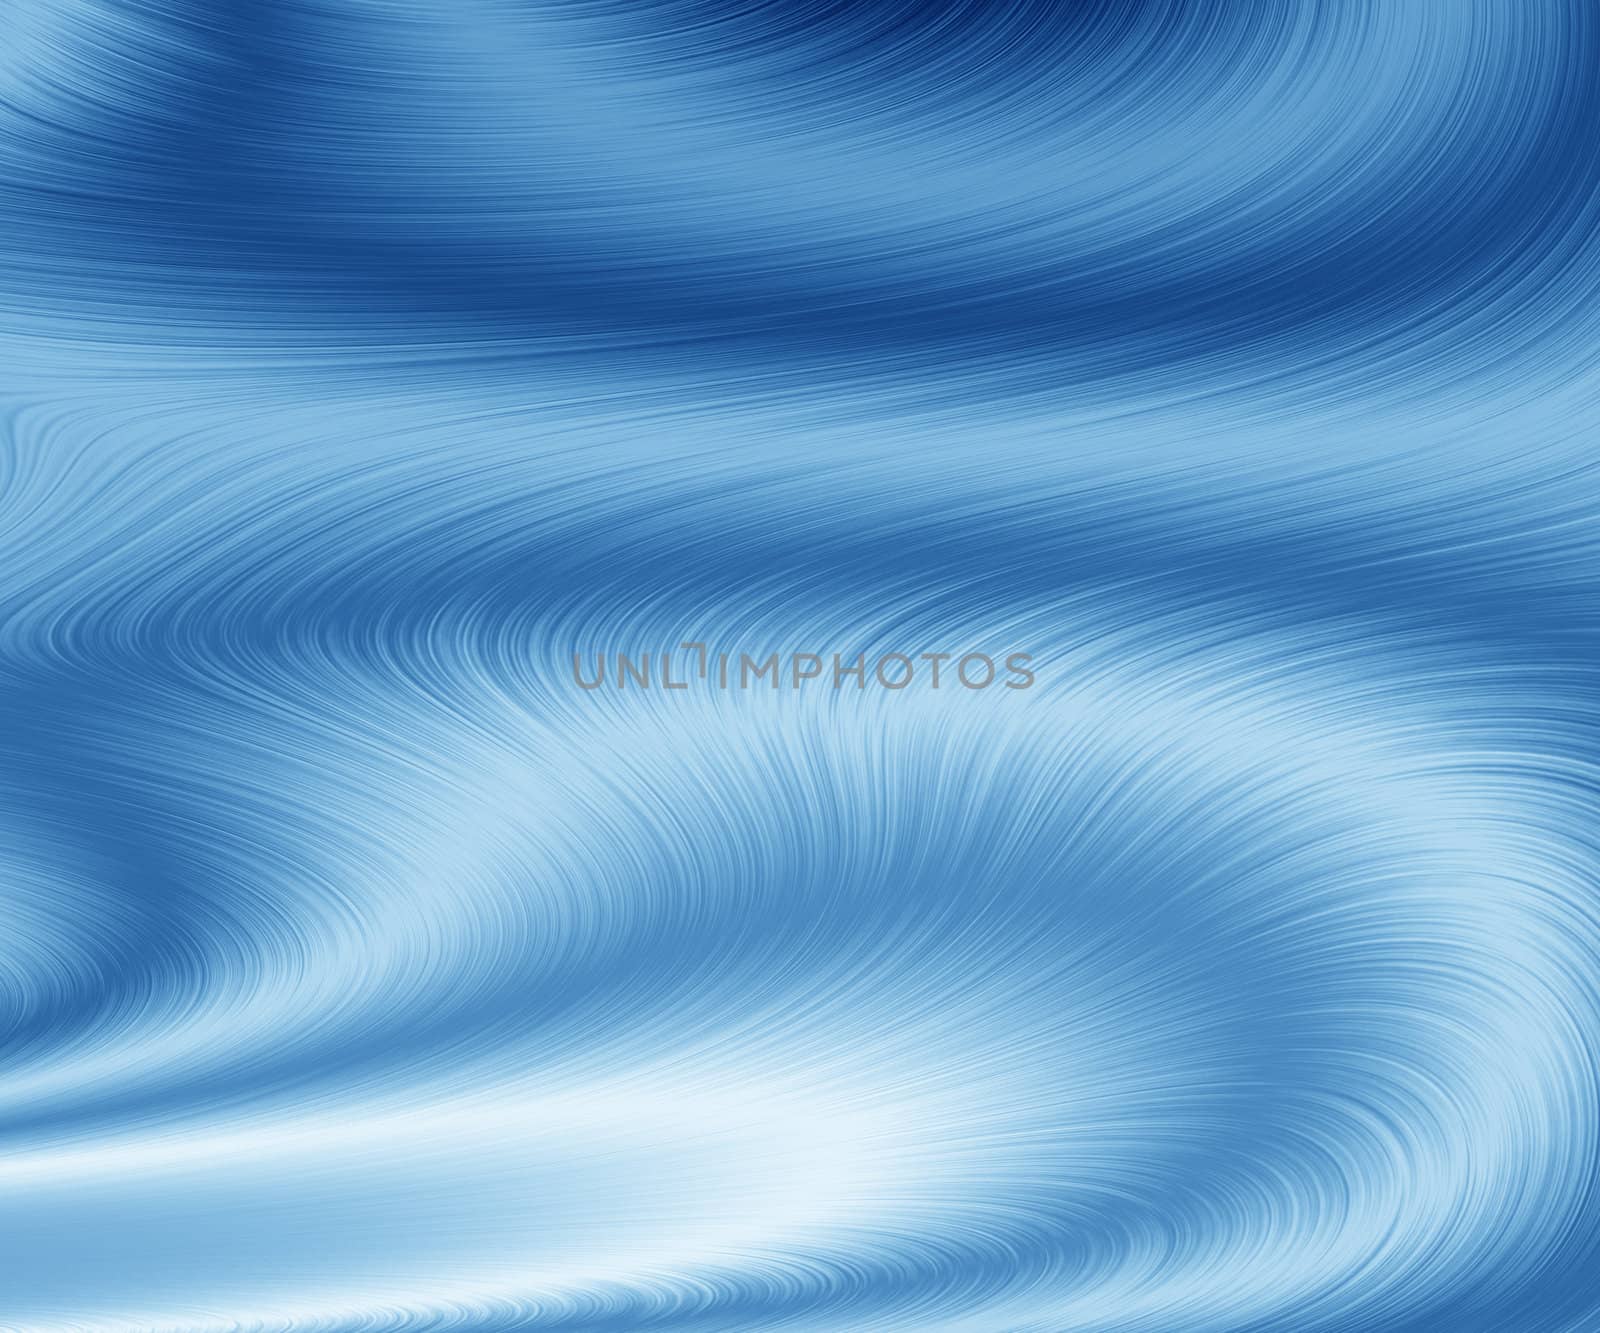 An image of a nice abstract blue wave background